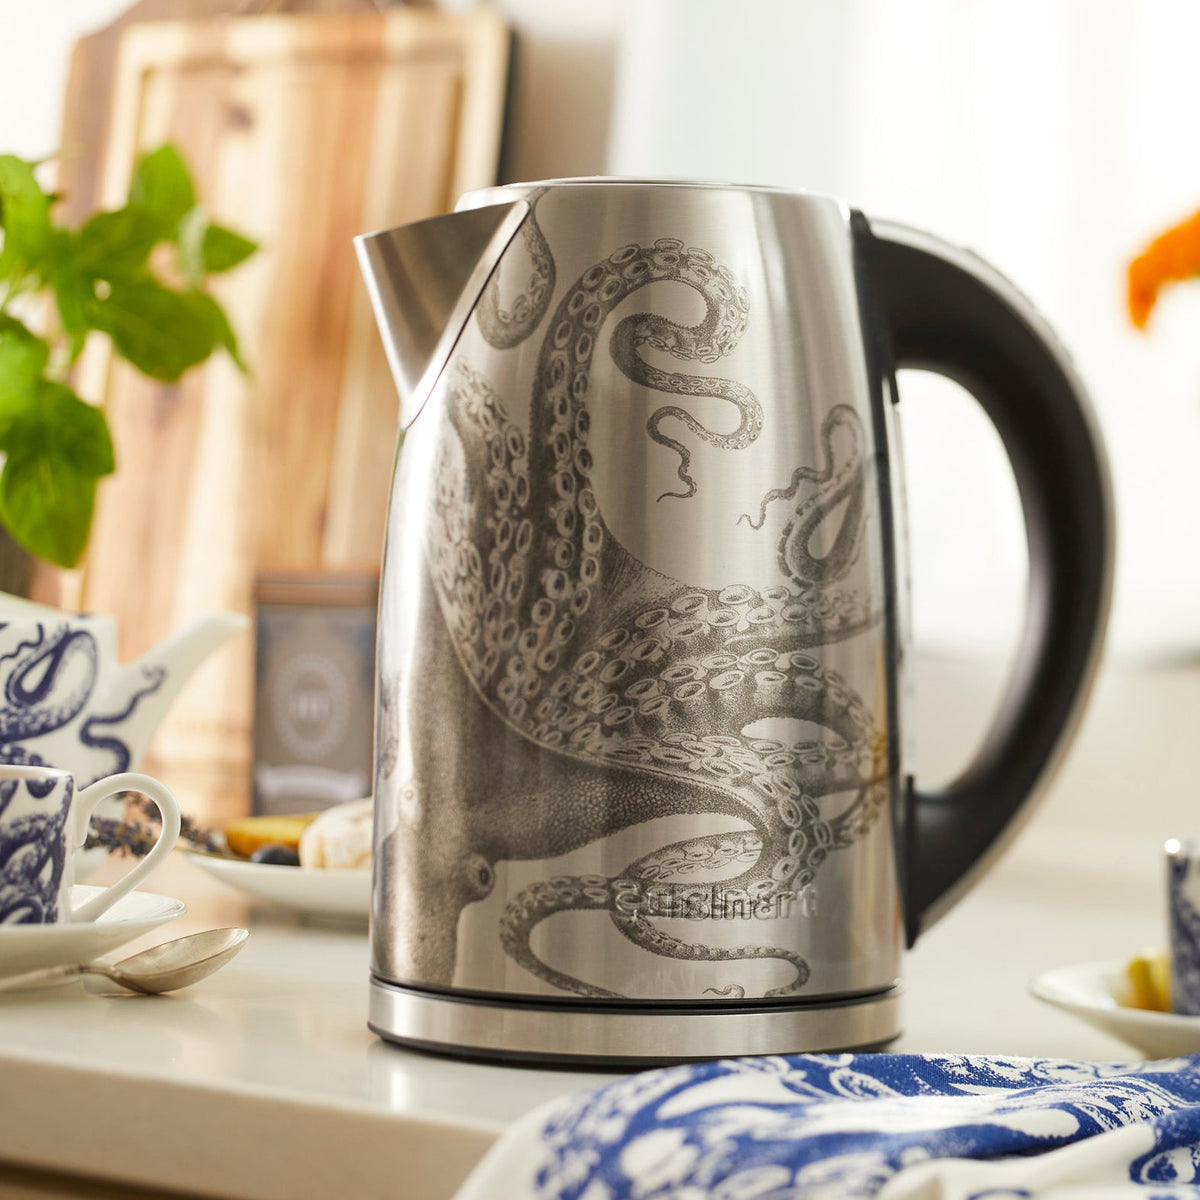 An Caskata X Cuisinart Limited Edition Lucy Programmable Electric Kettle with a cordless design, adorned with a playful octopus.